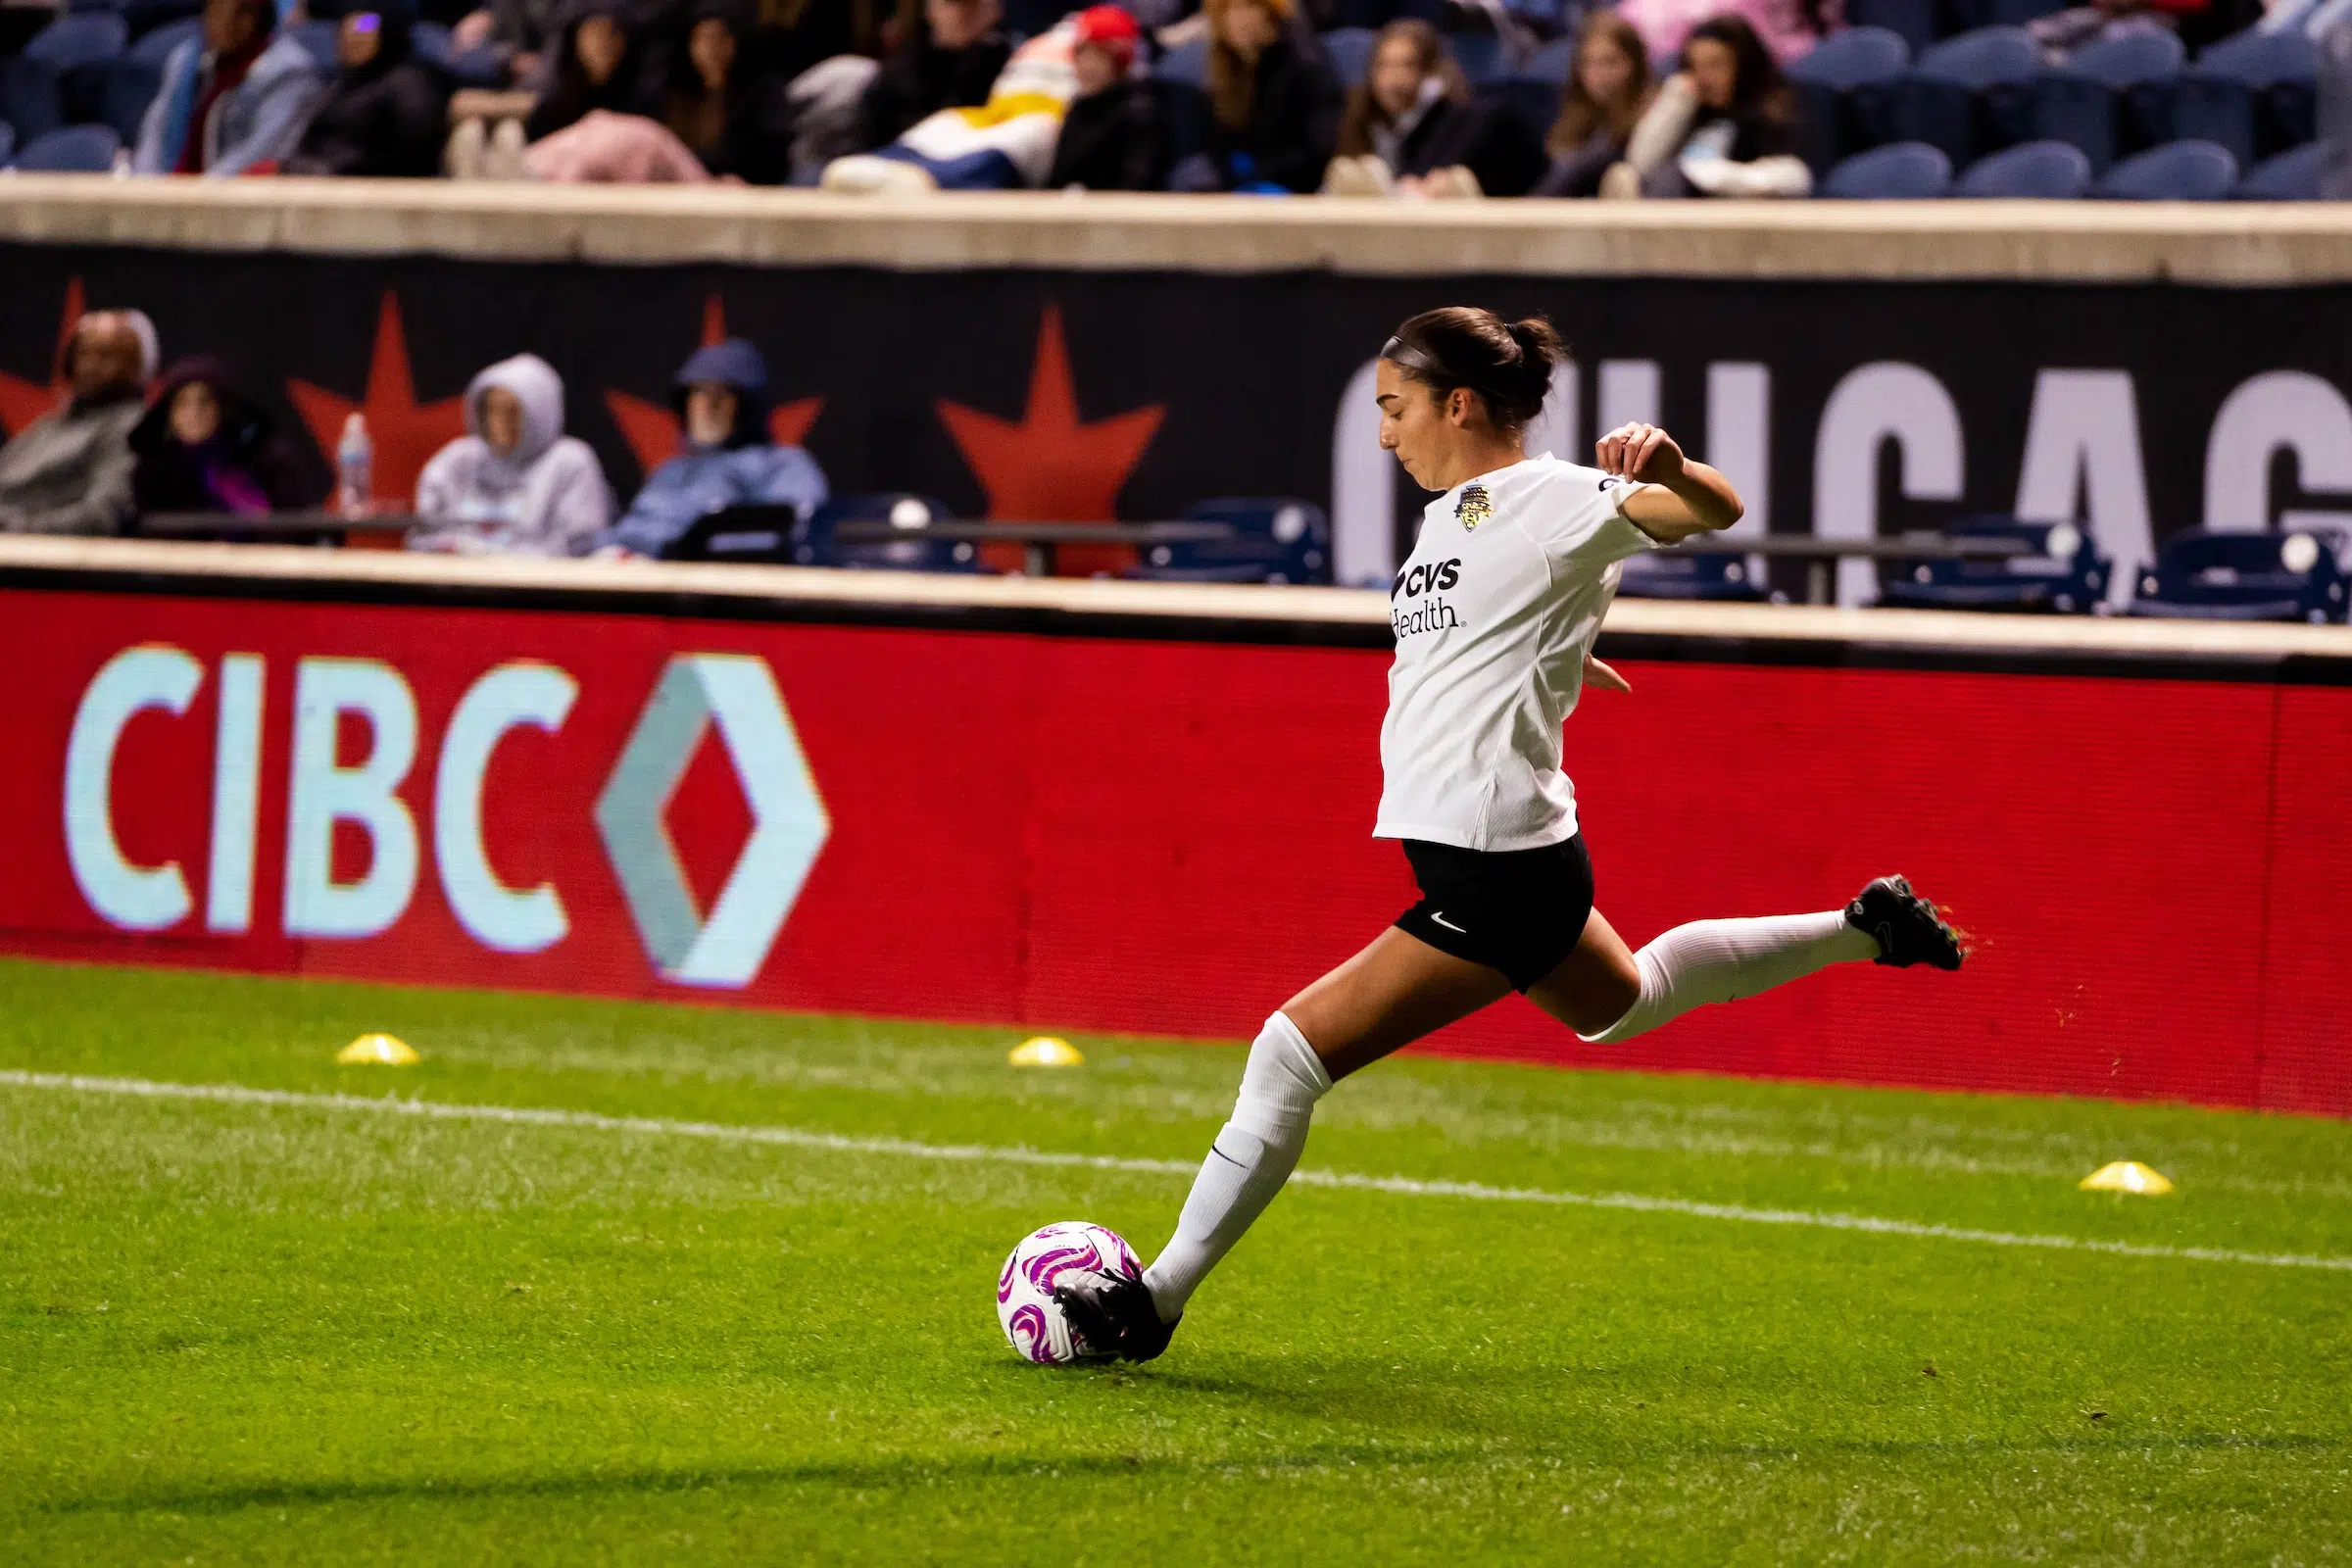 Lena Silano in a white top, black shorts and white socks winds up to cross a soccer ball towards goal.